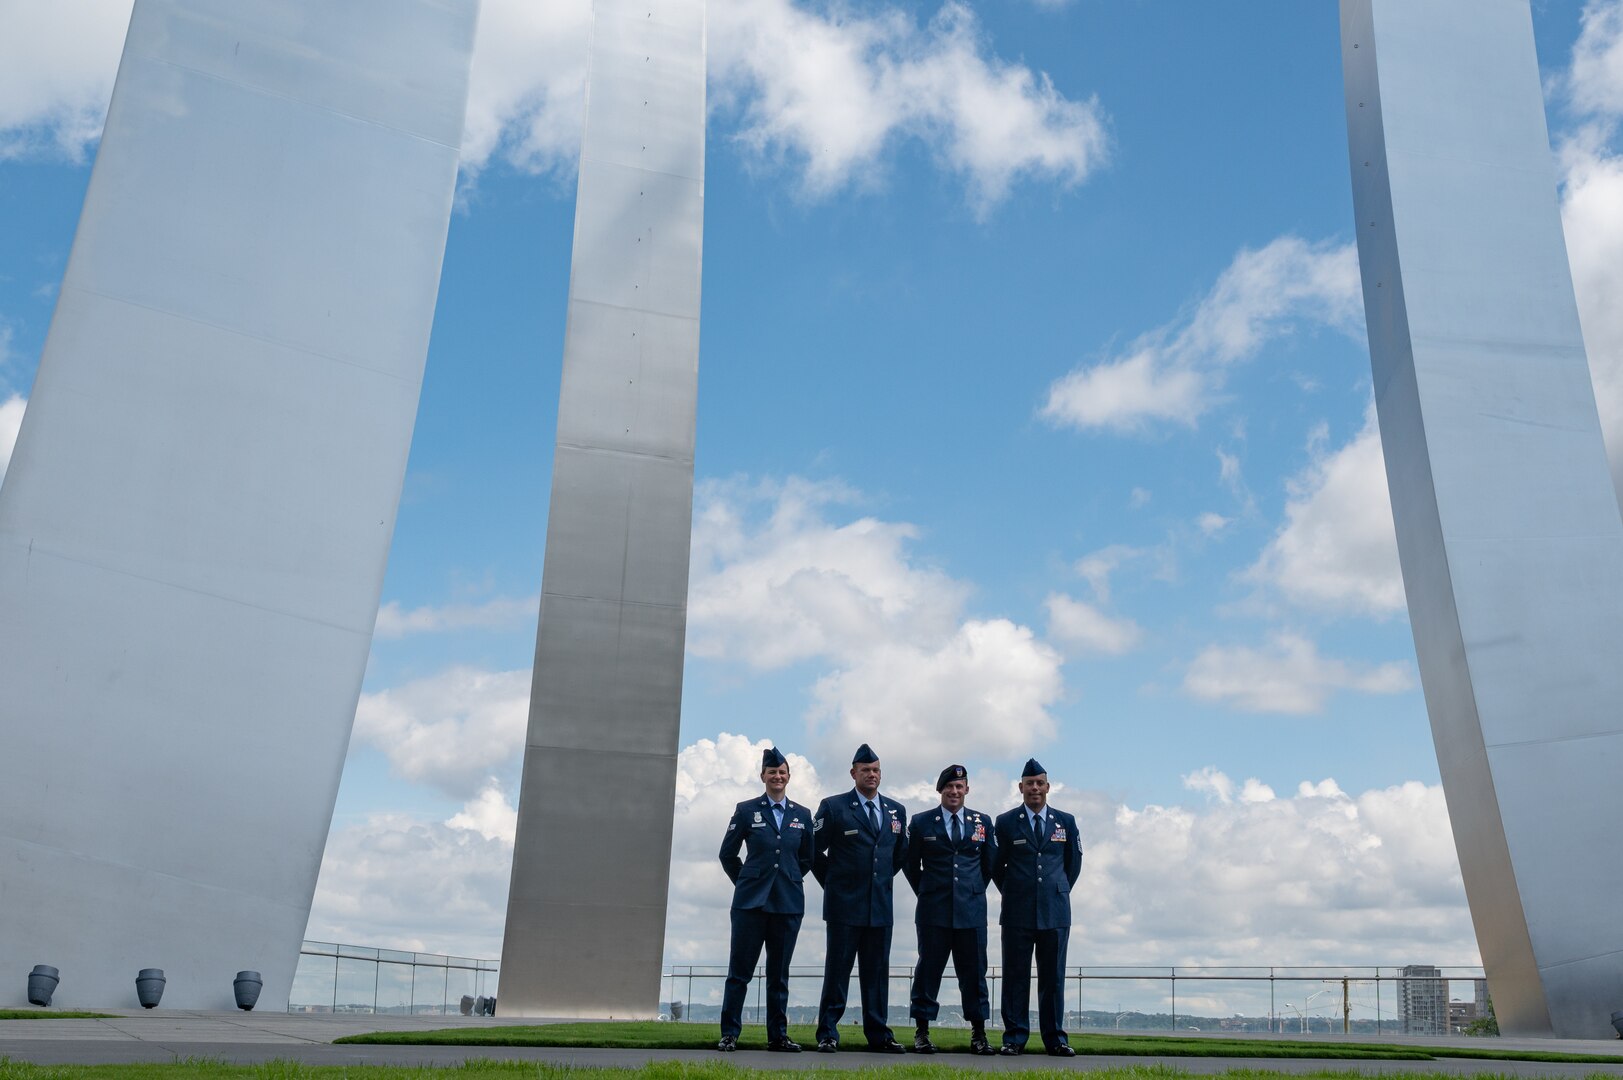 From left: U.S. Air Force Senior Airman Kristina L. Schneider, of the 179th Airlift Wing, Ohio National Guard; Tech Sgt. Brett A. Yoakum, of the 164th Airlift Wing, Tennessee National Guard; Master Sgt. Daniel P. Keller, of the 124th Fighter Wing, Idaho National Guard; and Senior Master Sgt. Jonathan Sotomayor, of the 125th Fighter Squadron, Florida National Guard, at the Air Force Memorial, Arlington, Virginia, Aug. 22, 2022. The event was part of Focus on the Force Week 2022, an annual event hosted by the command chief of the Air National Guard that highlights professional development and celebrates the accomplishments of the enlisted corps.